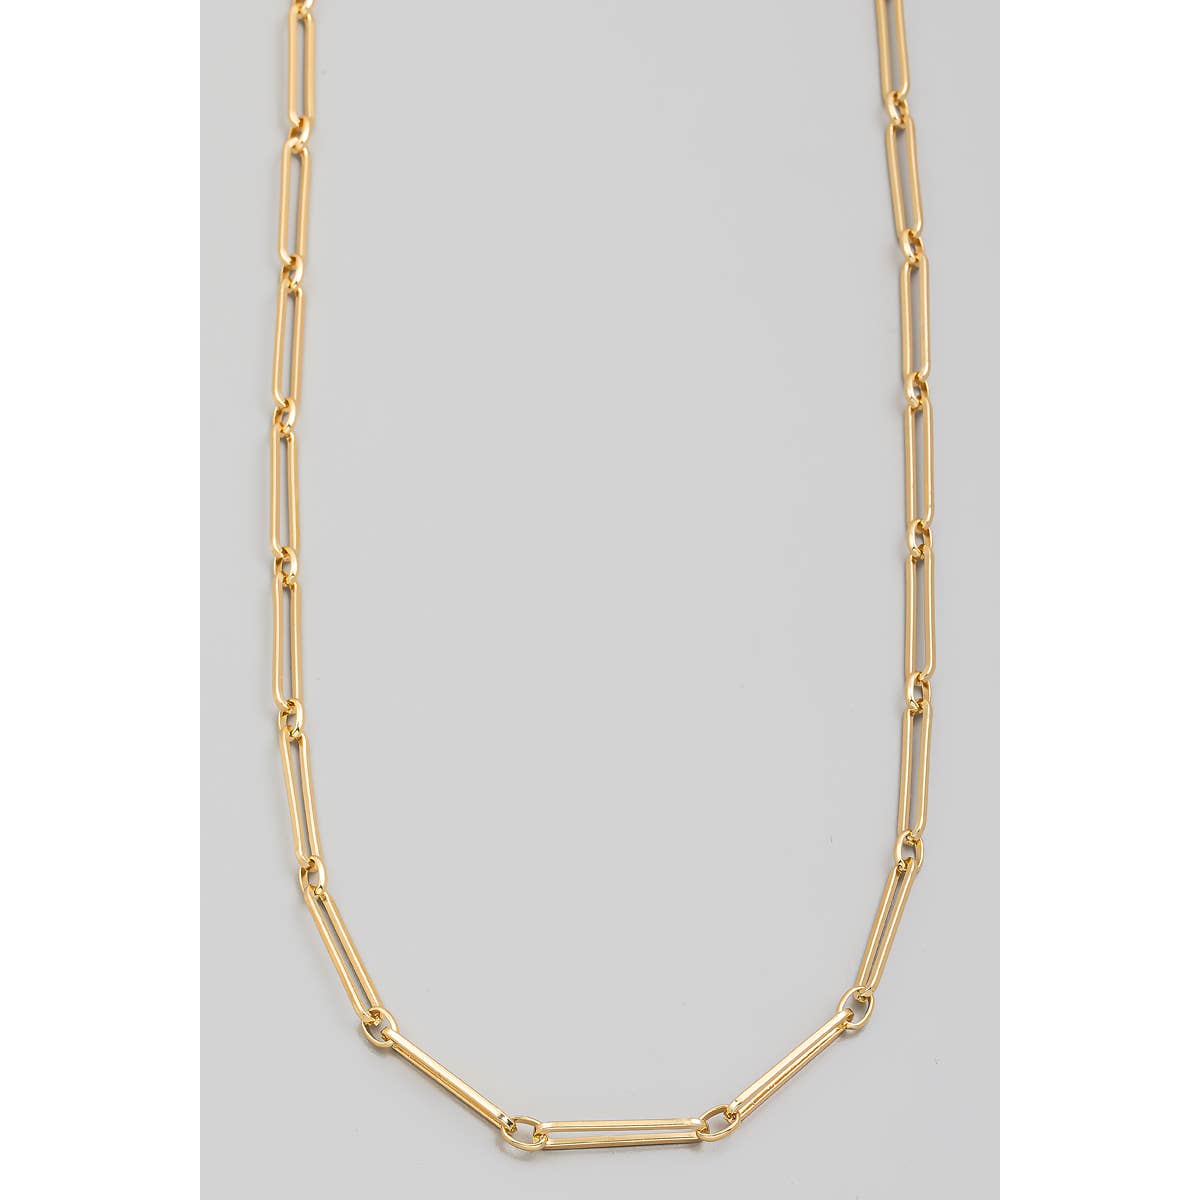 Long Oval Chain Toggle Necklace | Stuffology Boutique-Necklaces-The Looks by Fame Accessories-Stuffology - Where Vintage Meets Modern, A Boutique for Real Women in Crosbyton, TX